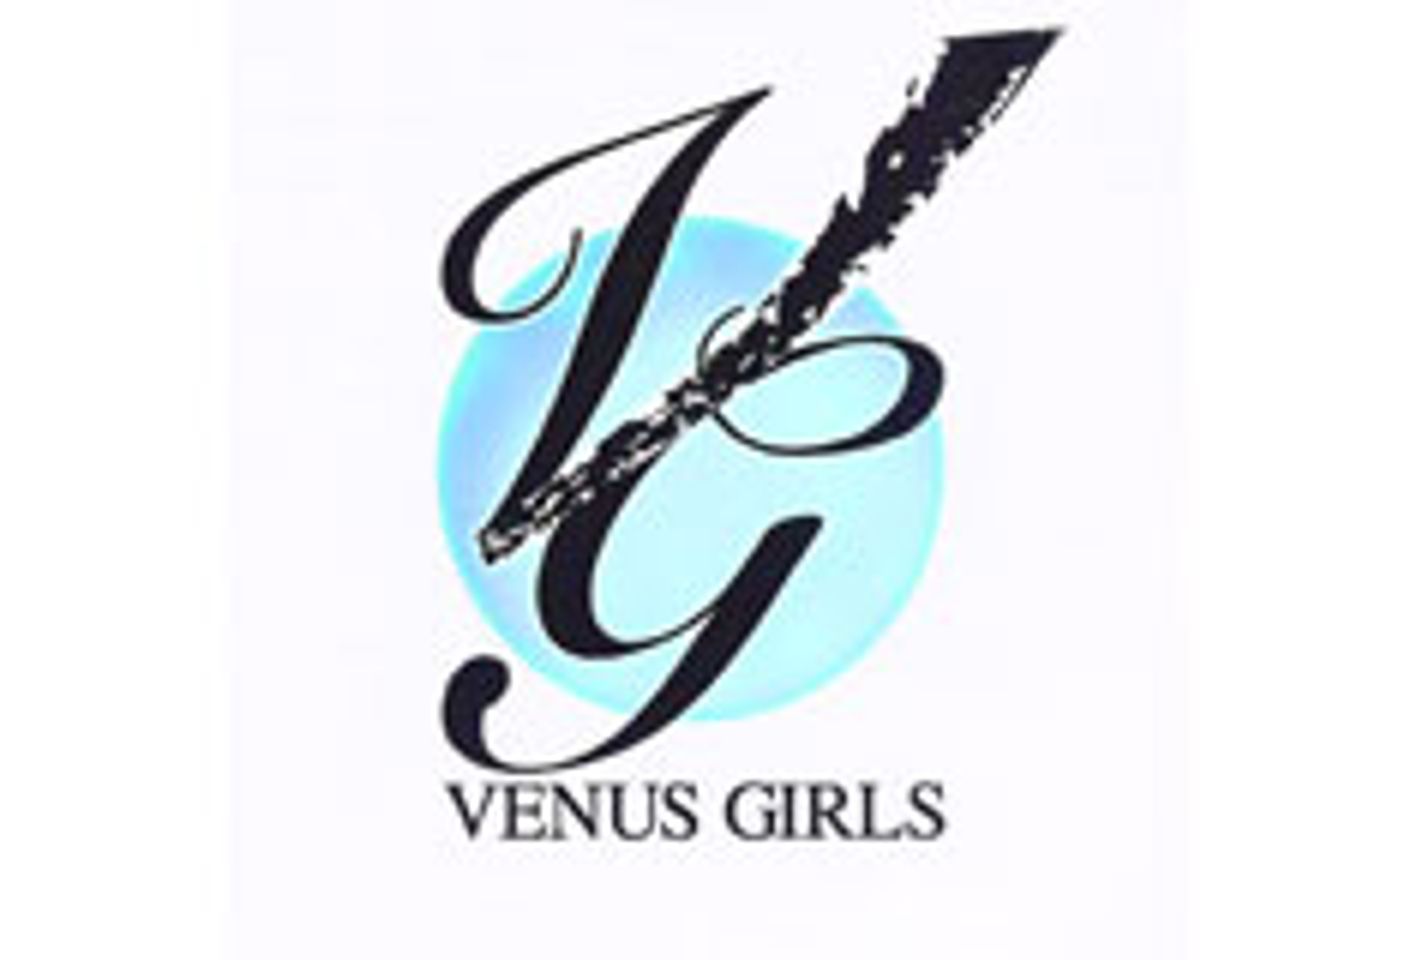 Venus Girls’ Talent Flourishes Behind and in Front of the Camera